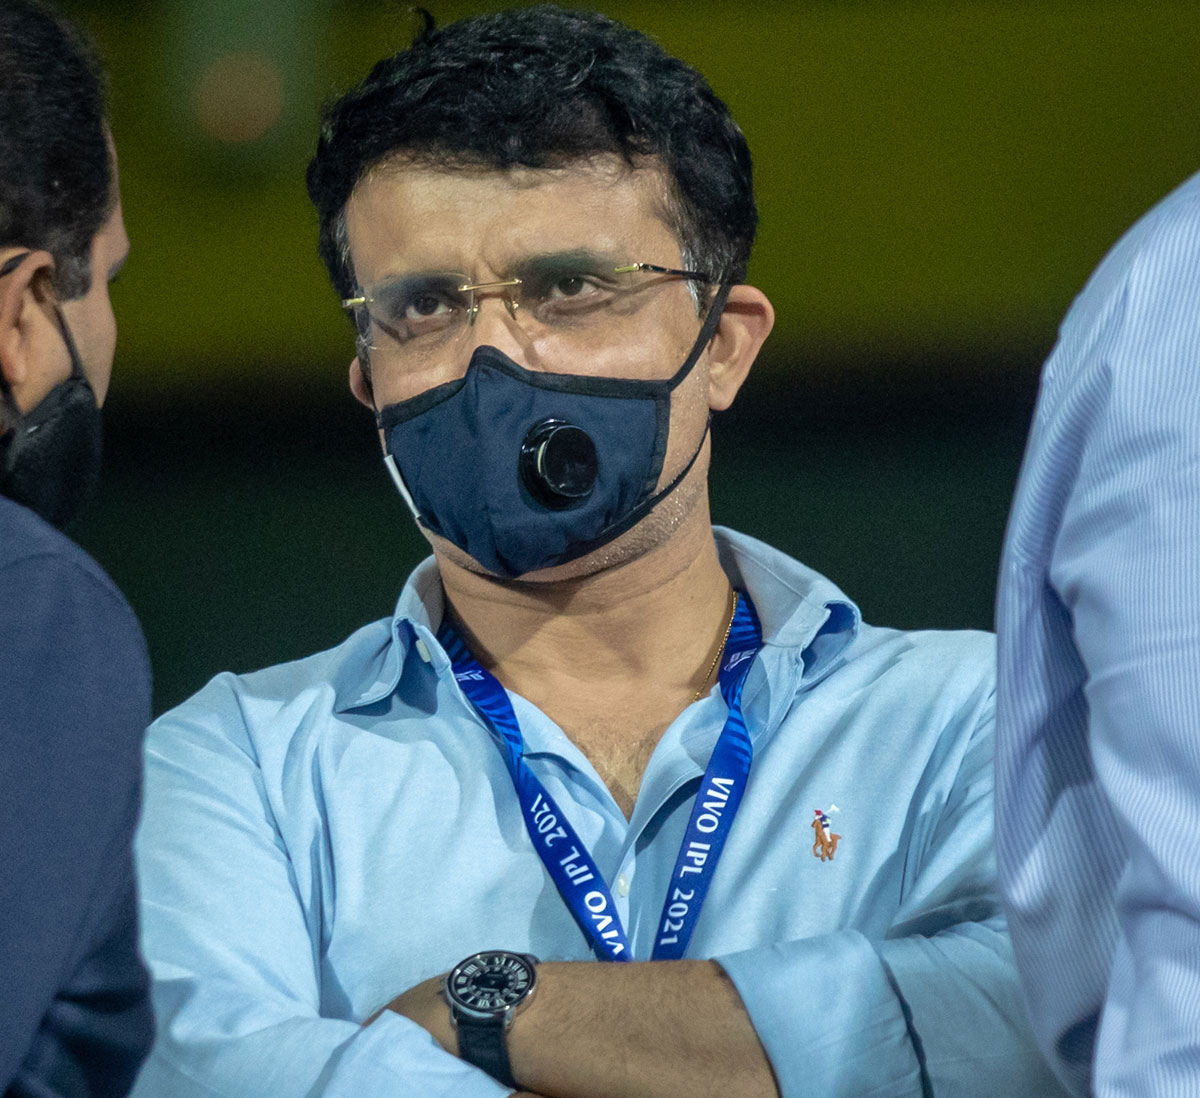 Safety of players is of paramount importance: Ganguly